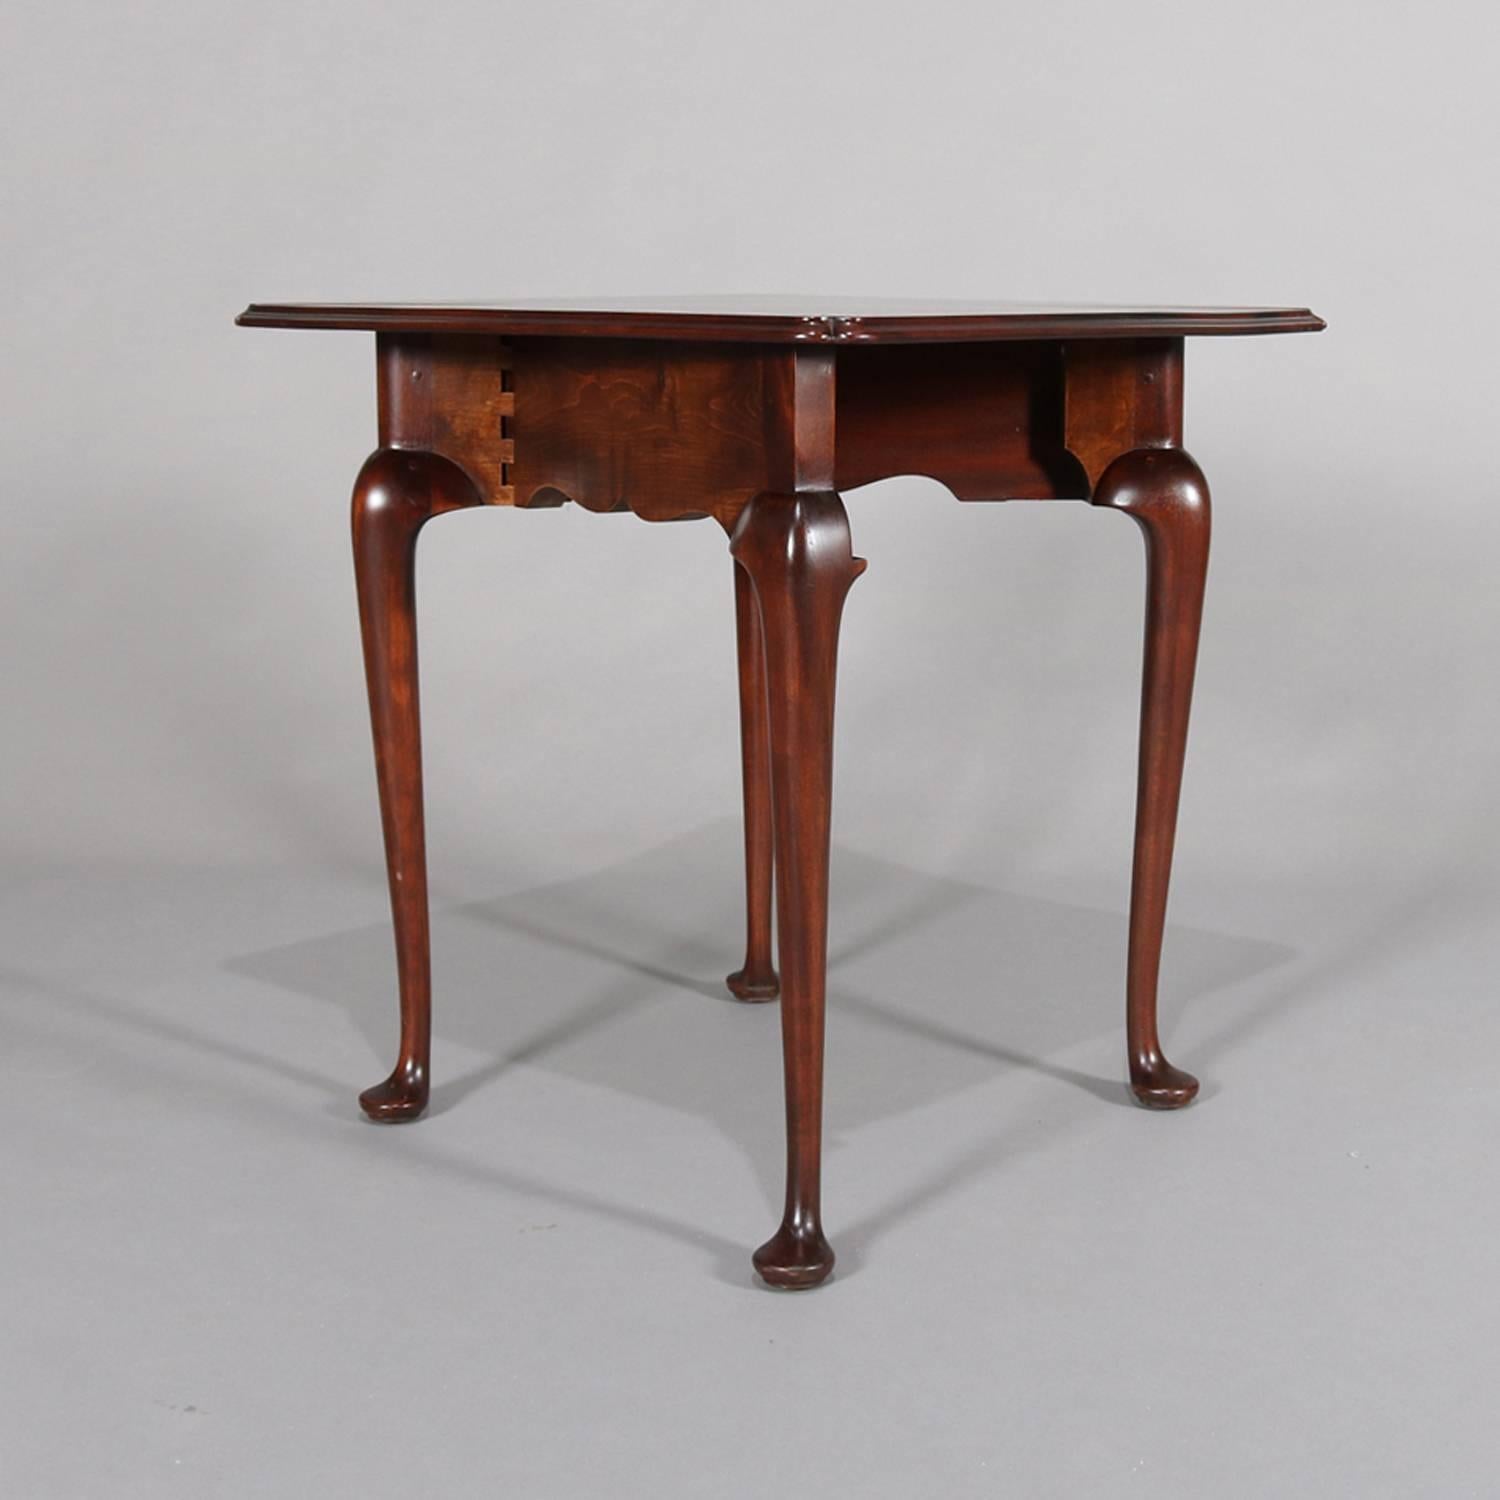 20th Century Queen Anne Style Mahogany Williamsburg Colonial Napkin Table by Kittinger